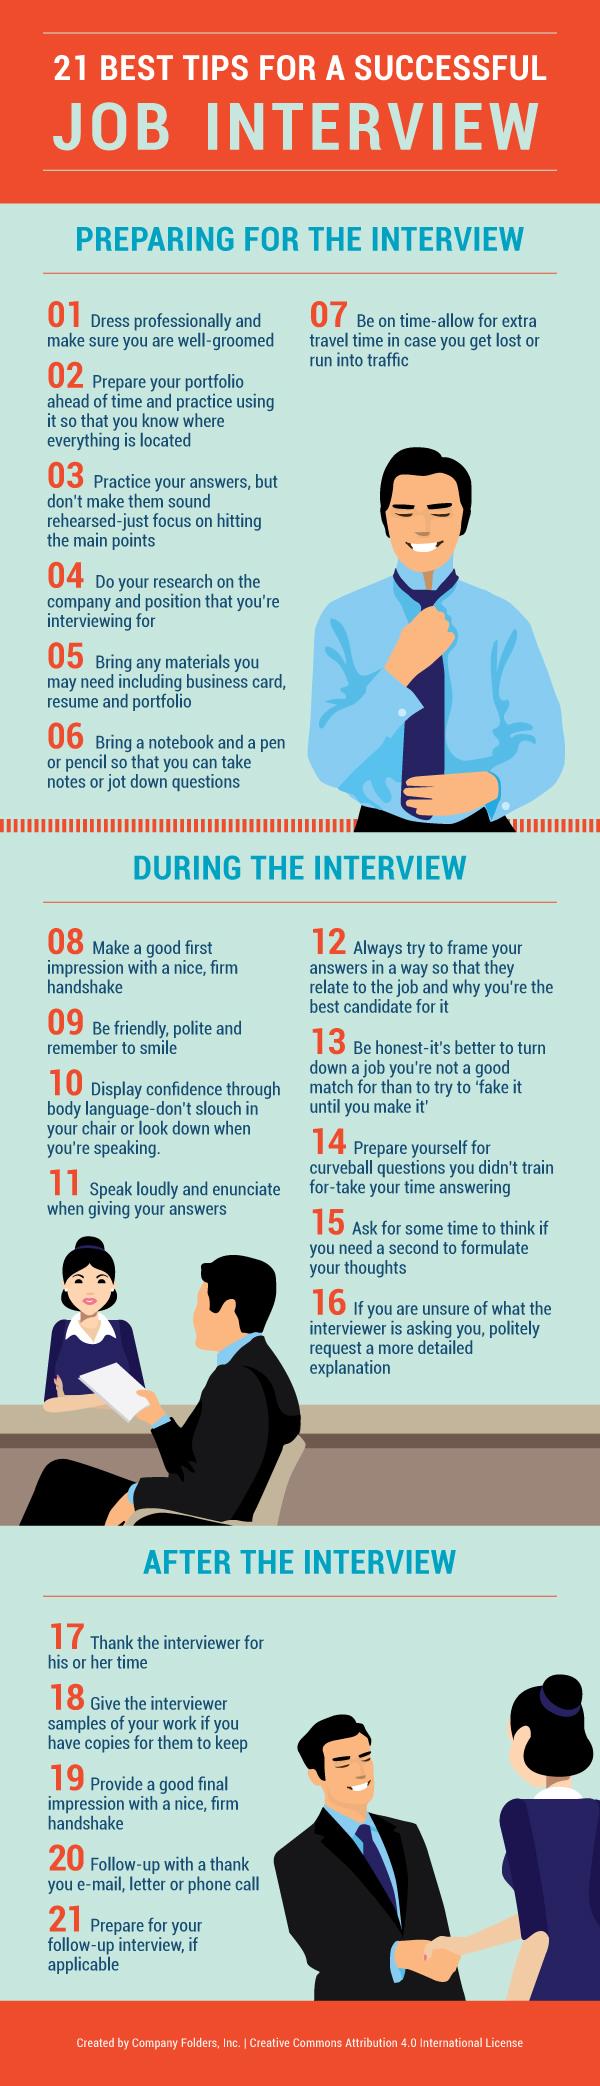 21 Best Tips For A Successful Job Interview